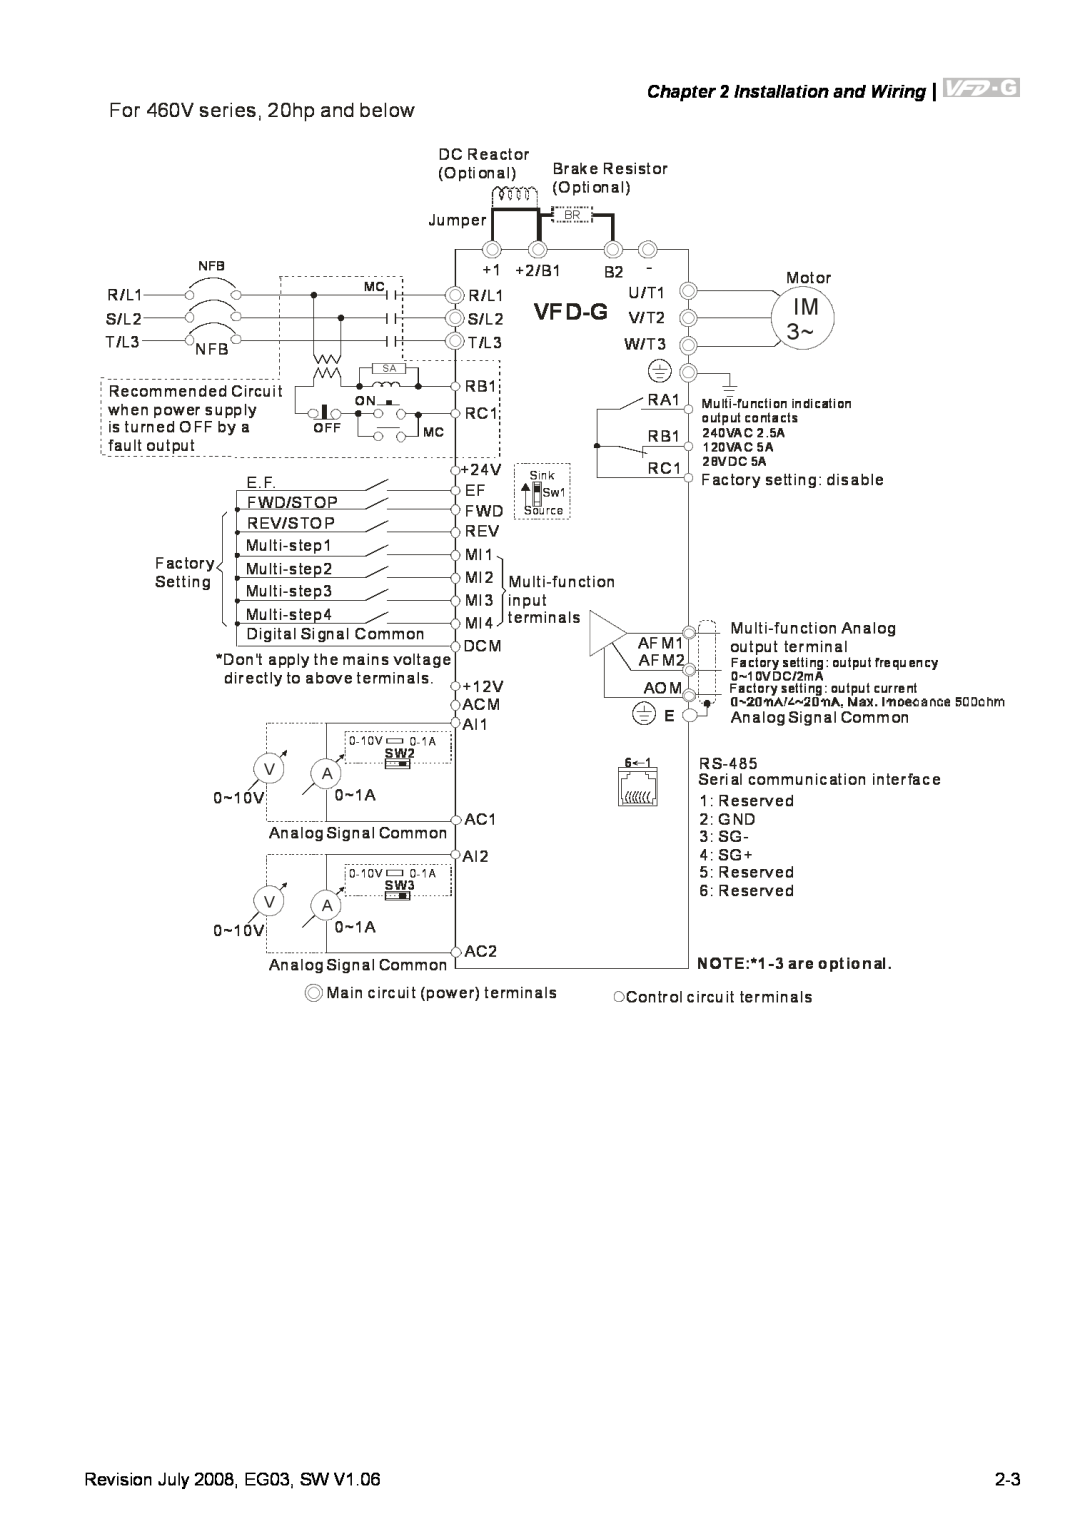 Delta Electronics VFD-G manual Vfd-G, Installation and Wiring, Revision July 2008, EG03, SW, NOTE*1- 3 are optional 